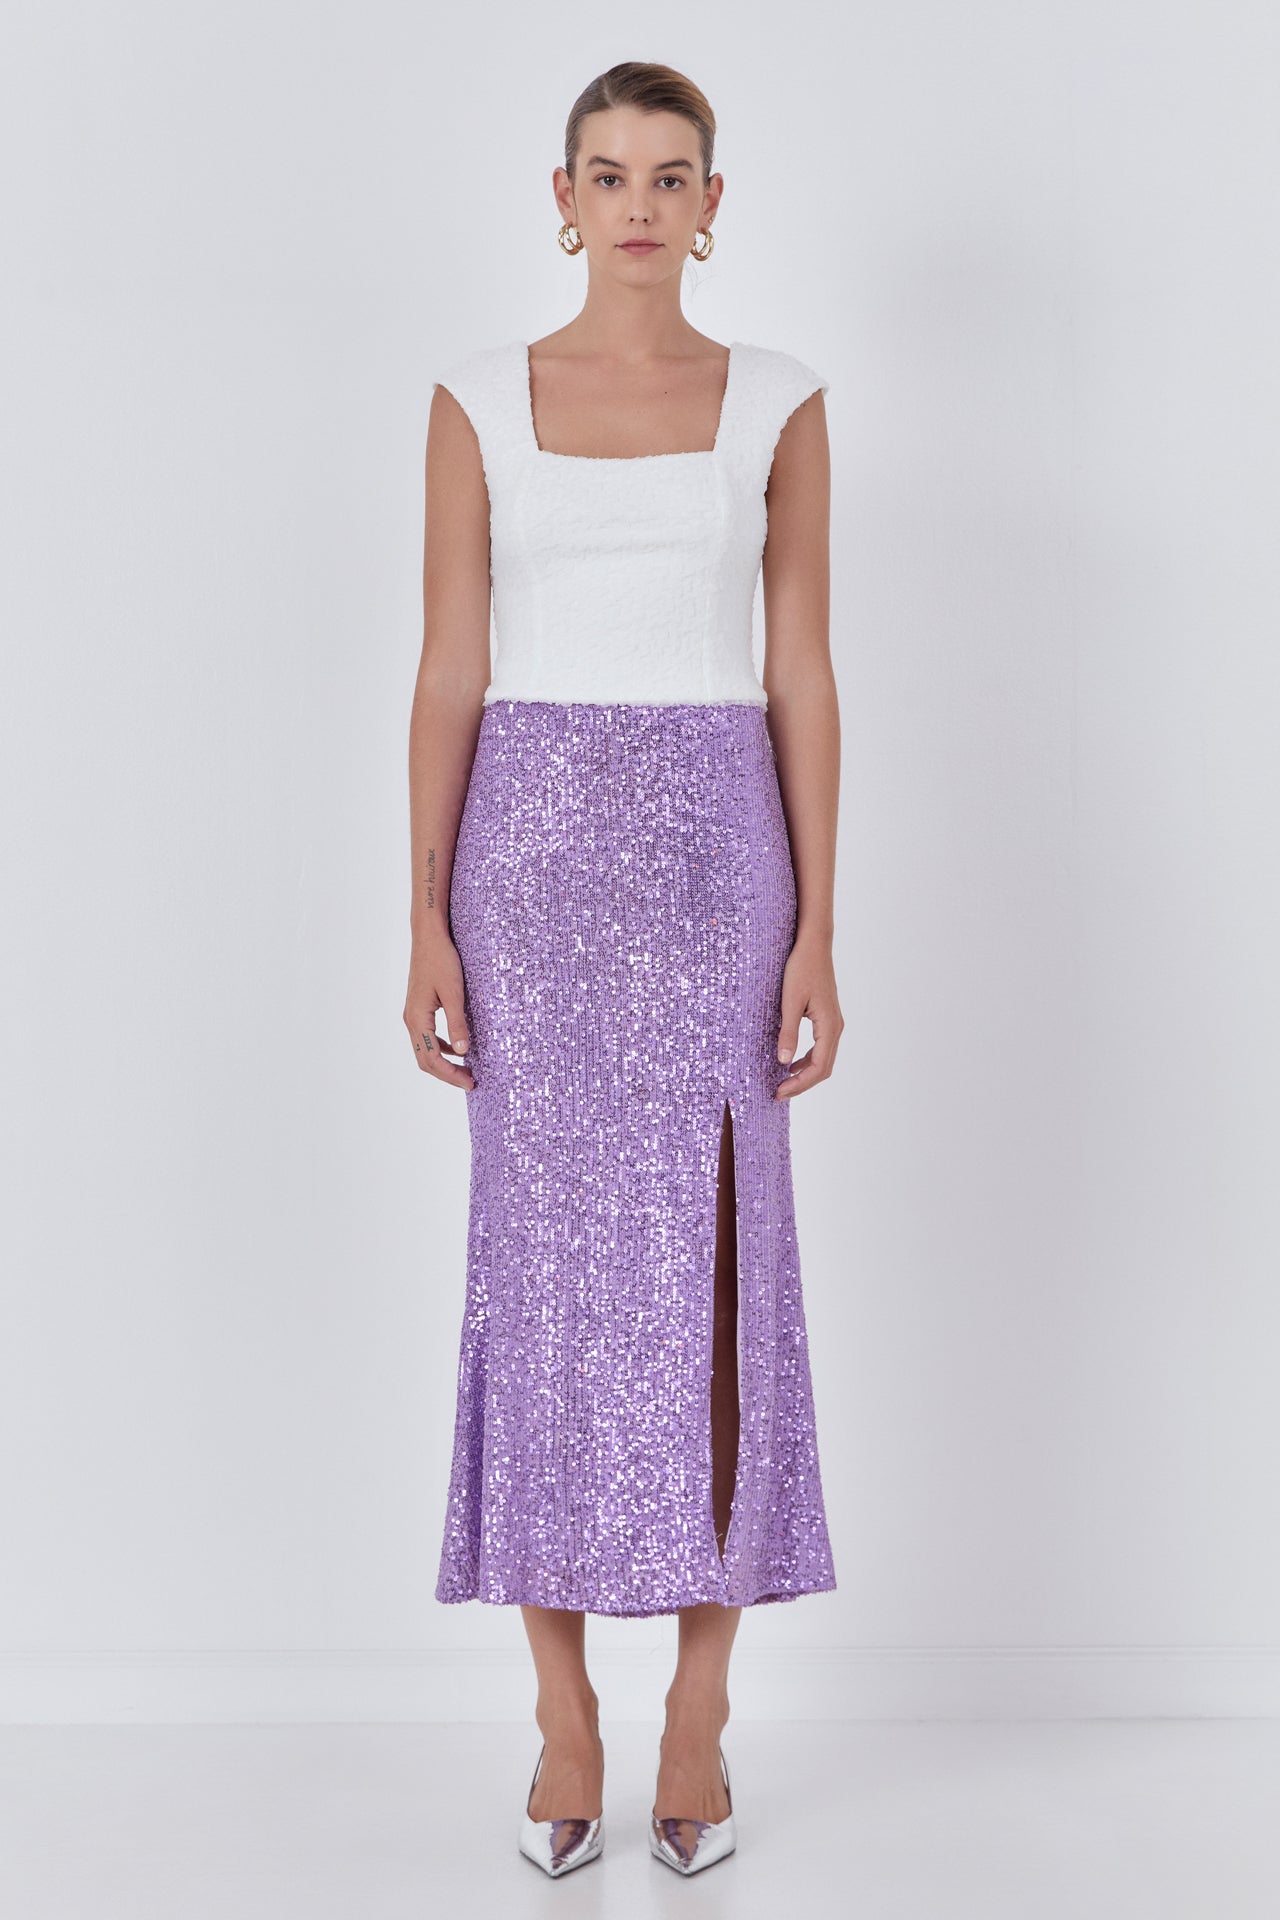 Endless Rose - Sequins Front Slit Midi Skirt - Skirts in Women's Clothing available at endlessrose.com